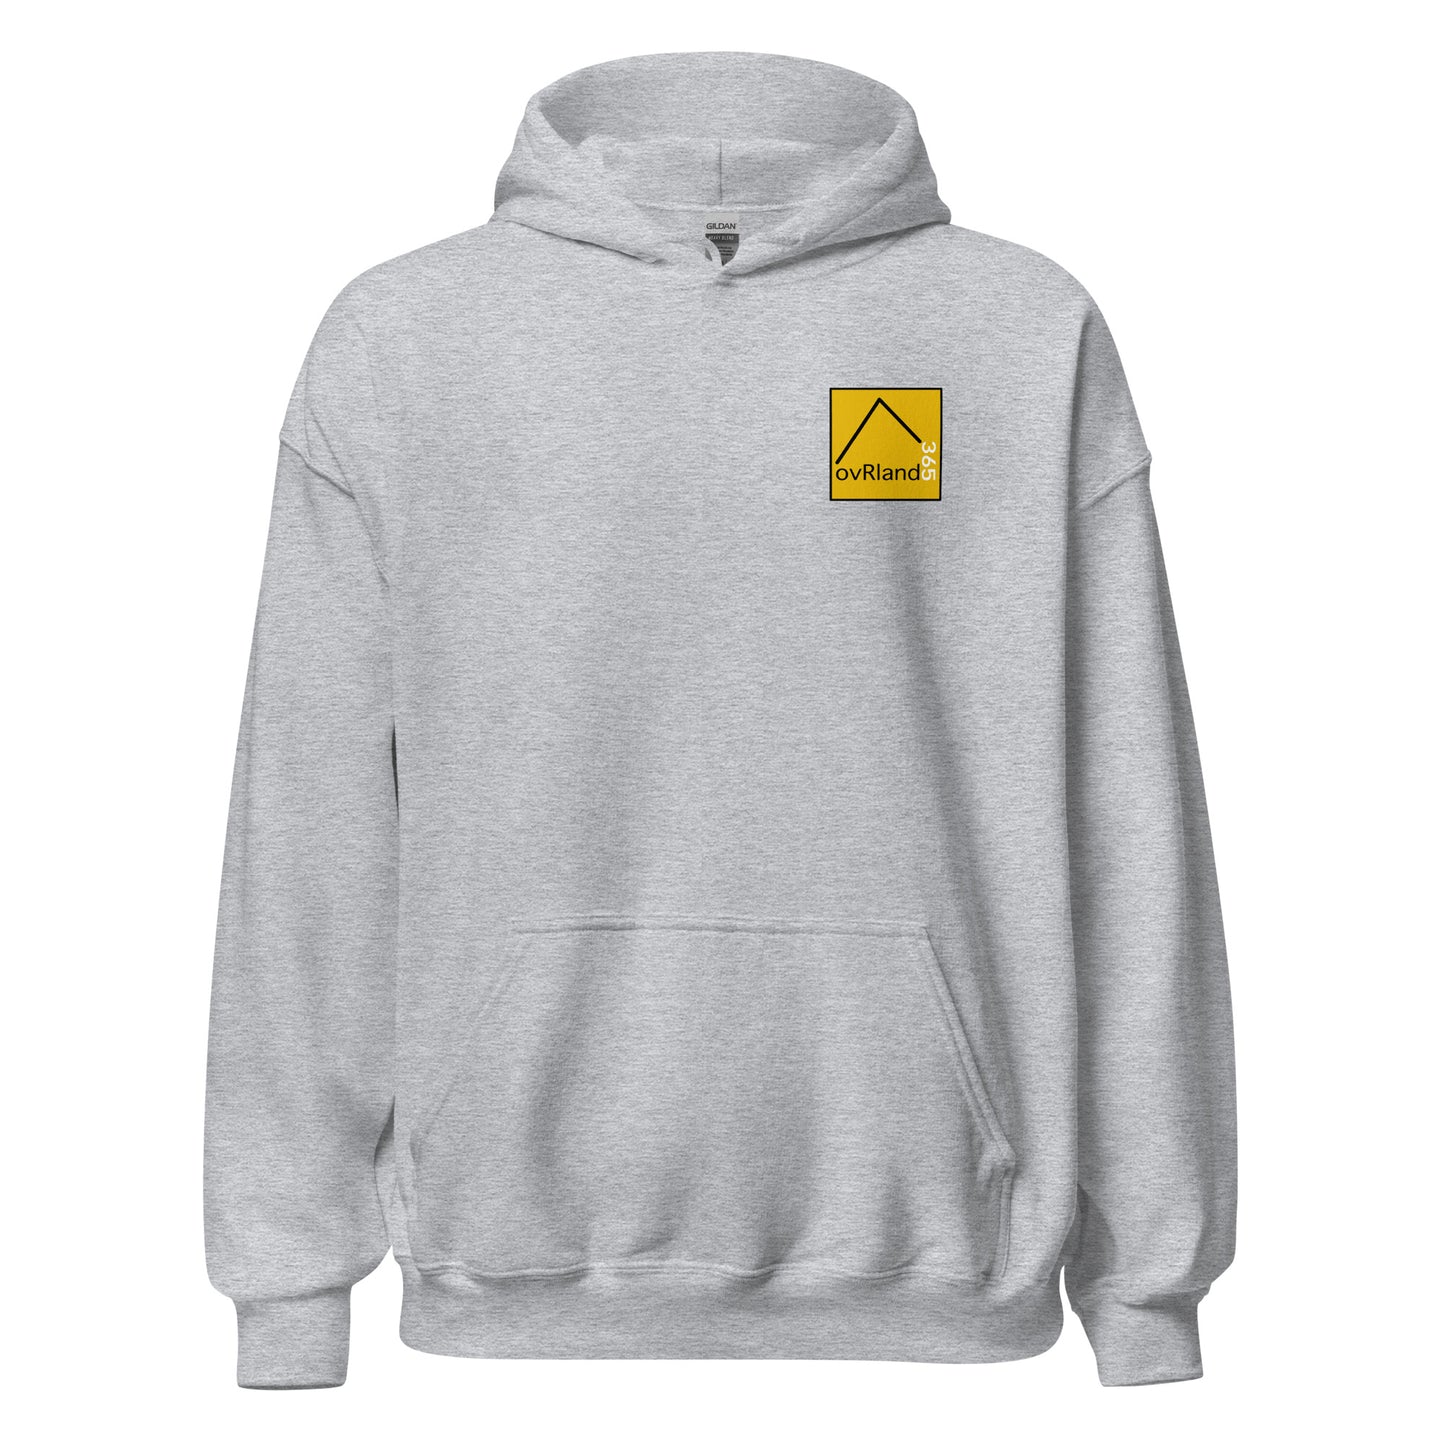 OVER LAND light grey hoodie. front view. overland365.com